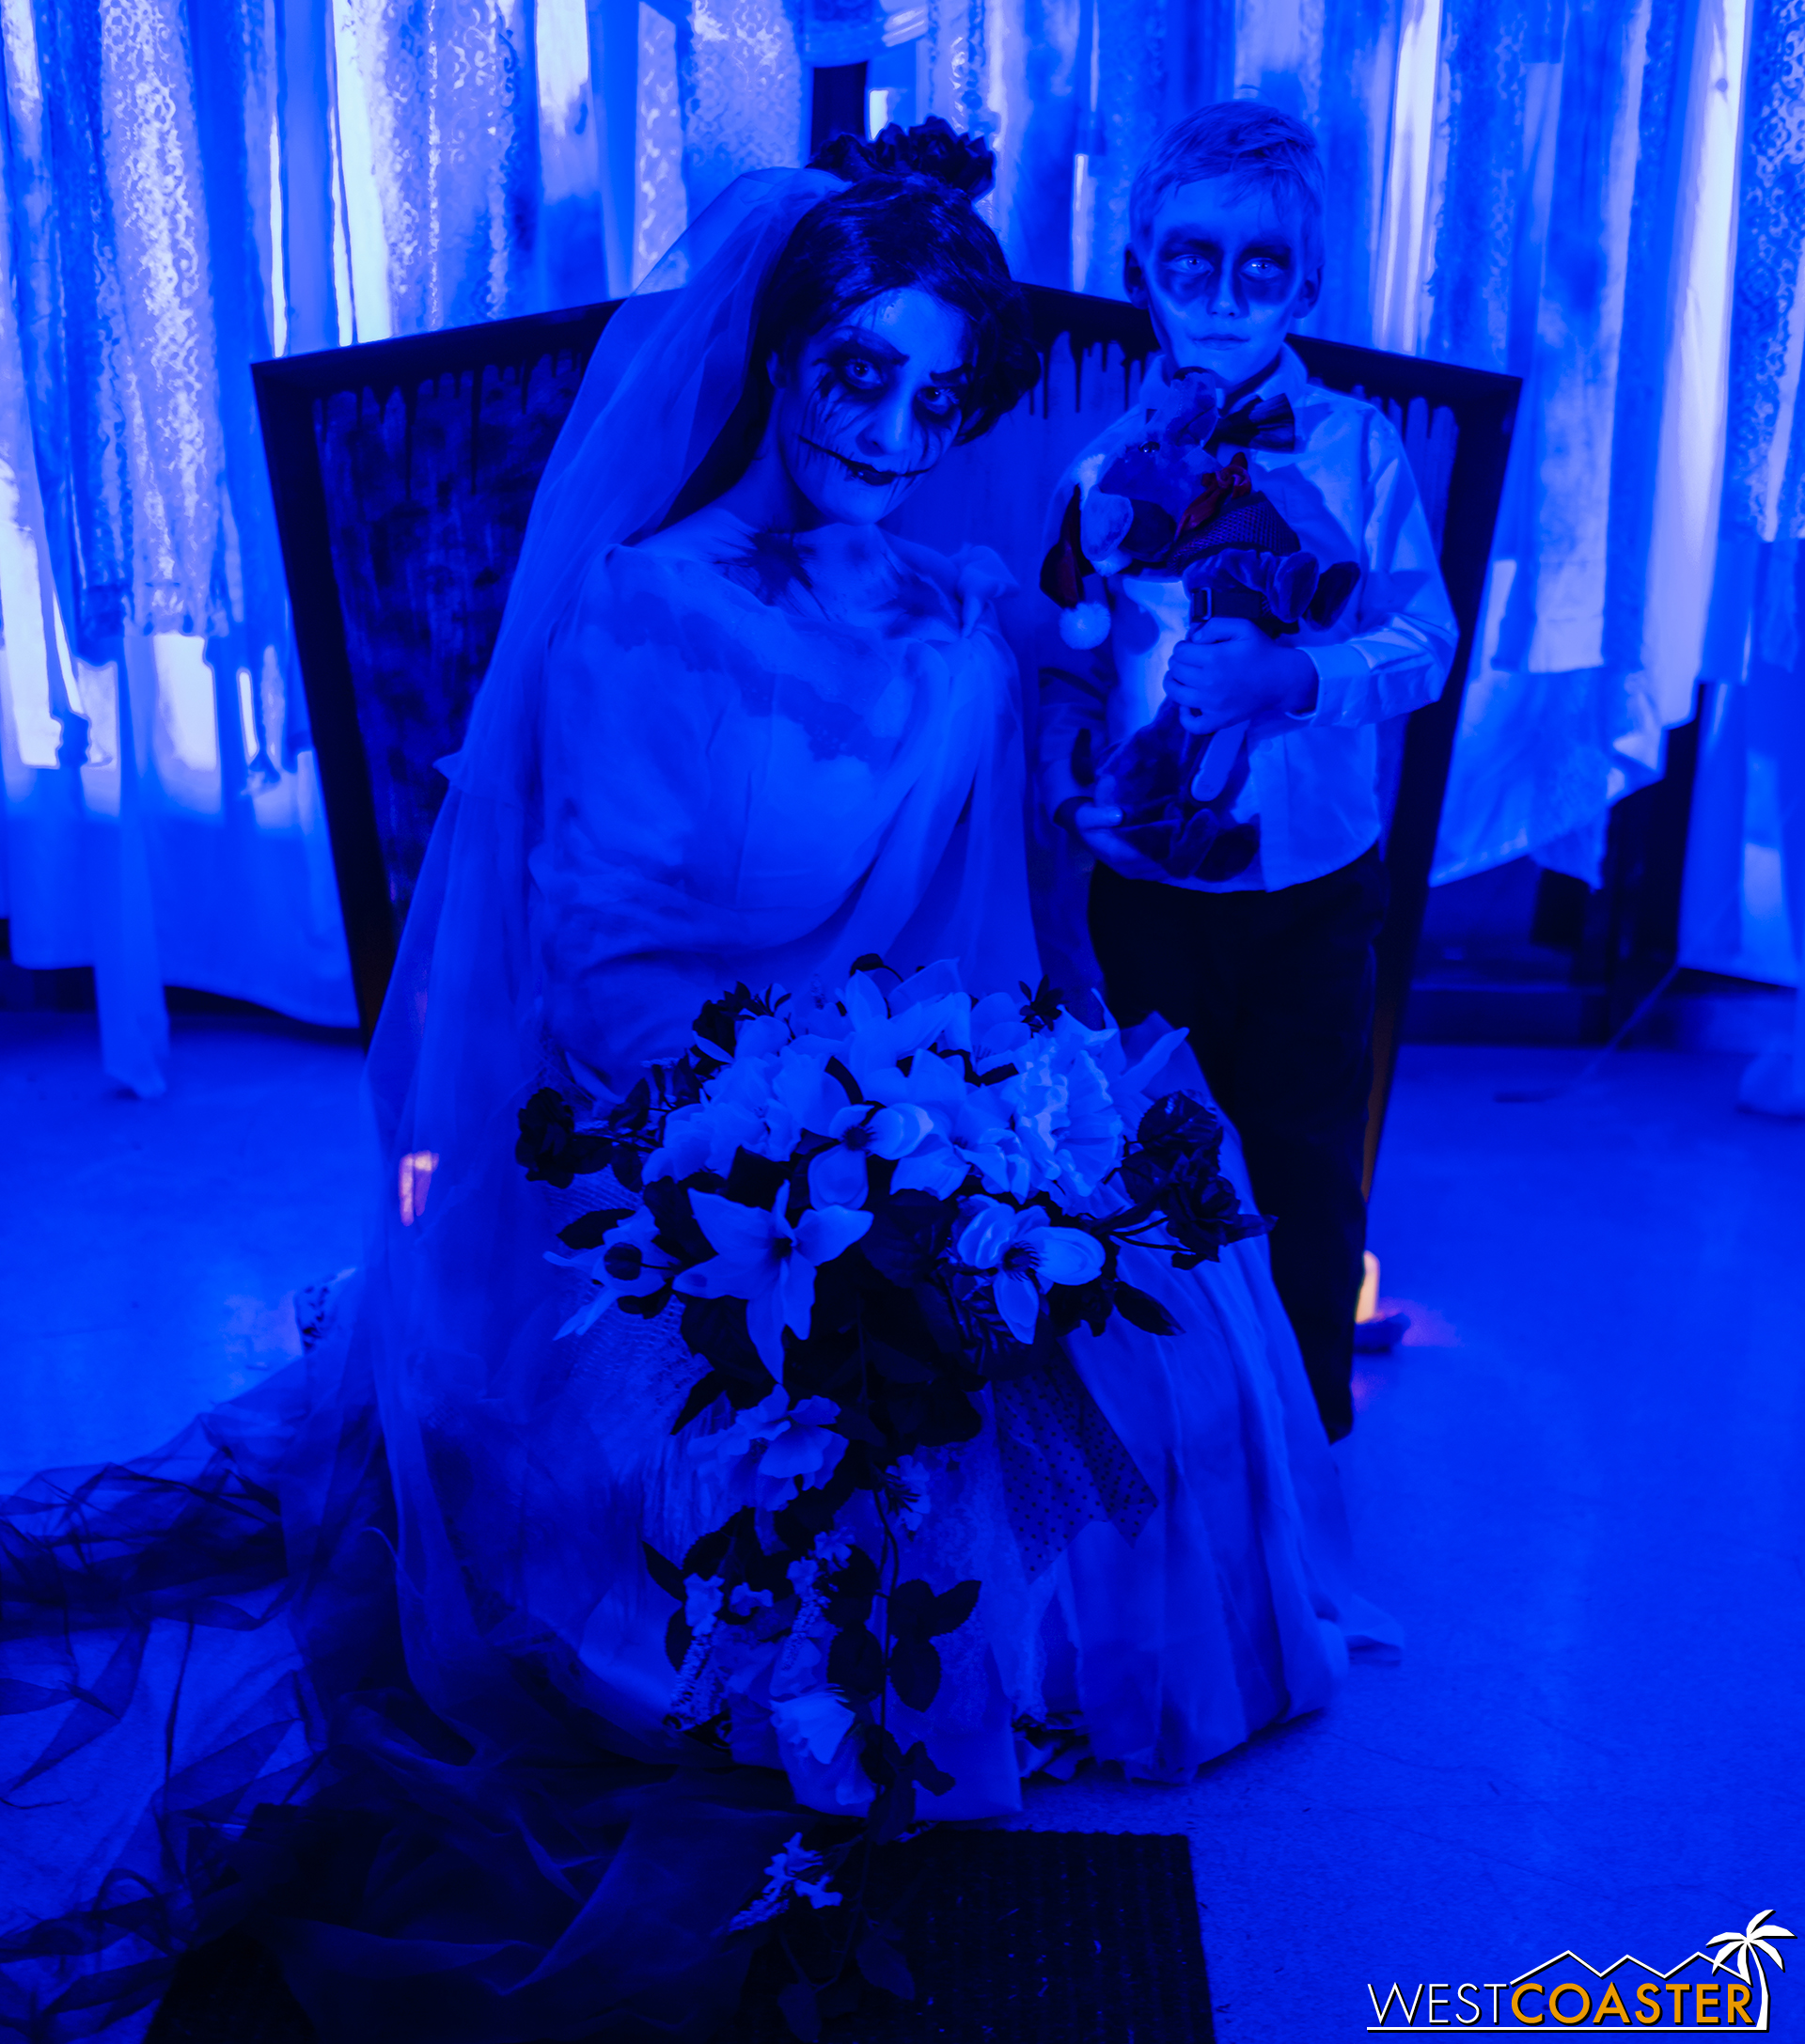  Nothing like a creepy bride to end the evening! 